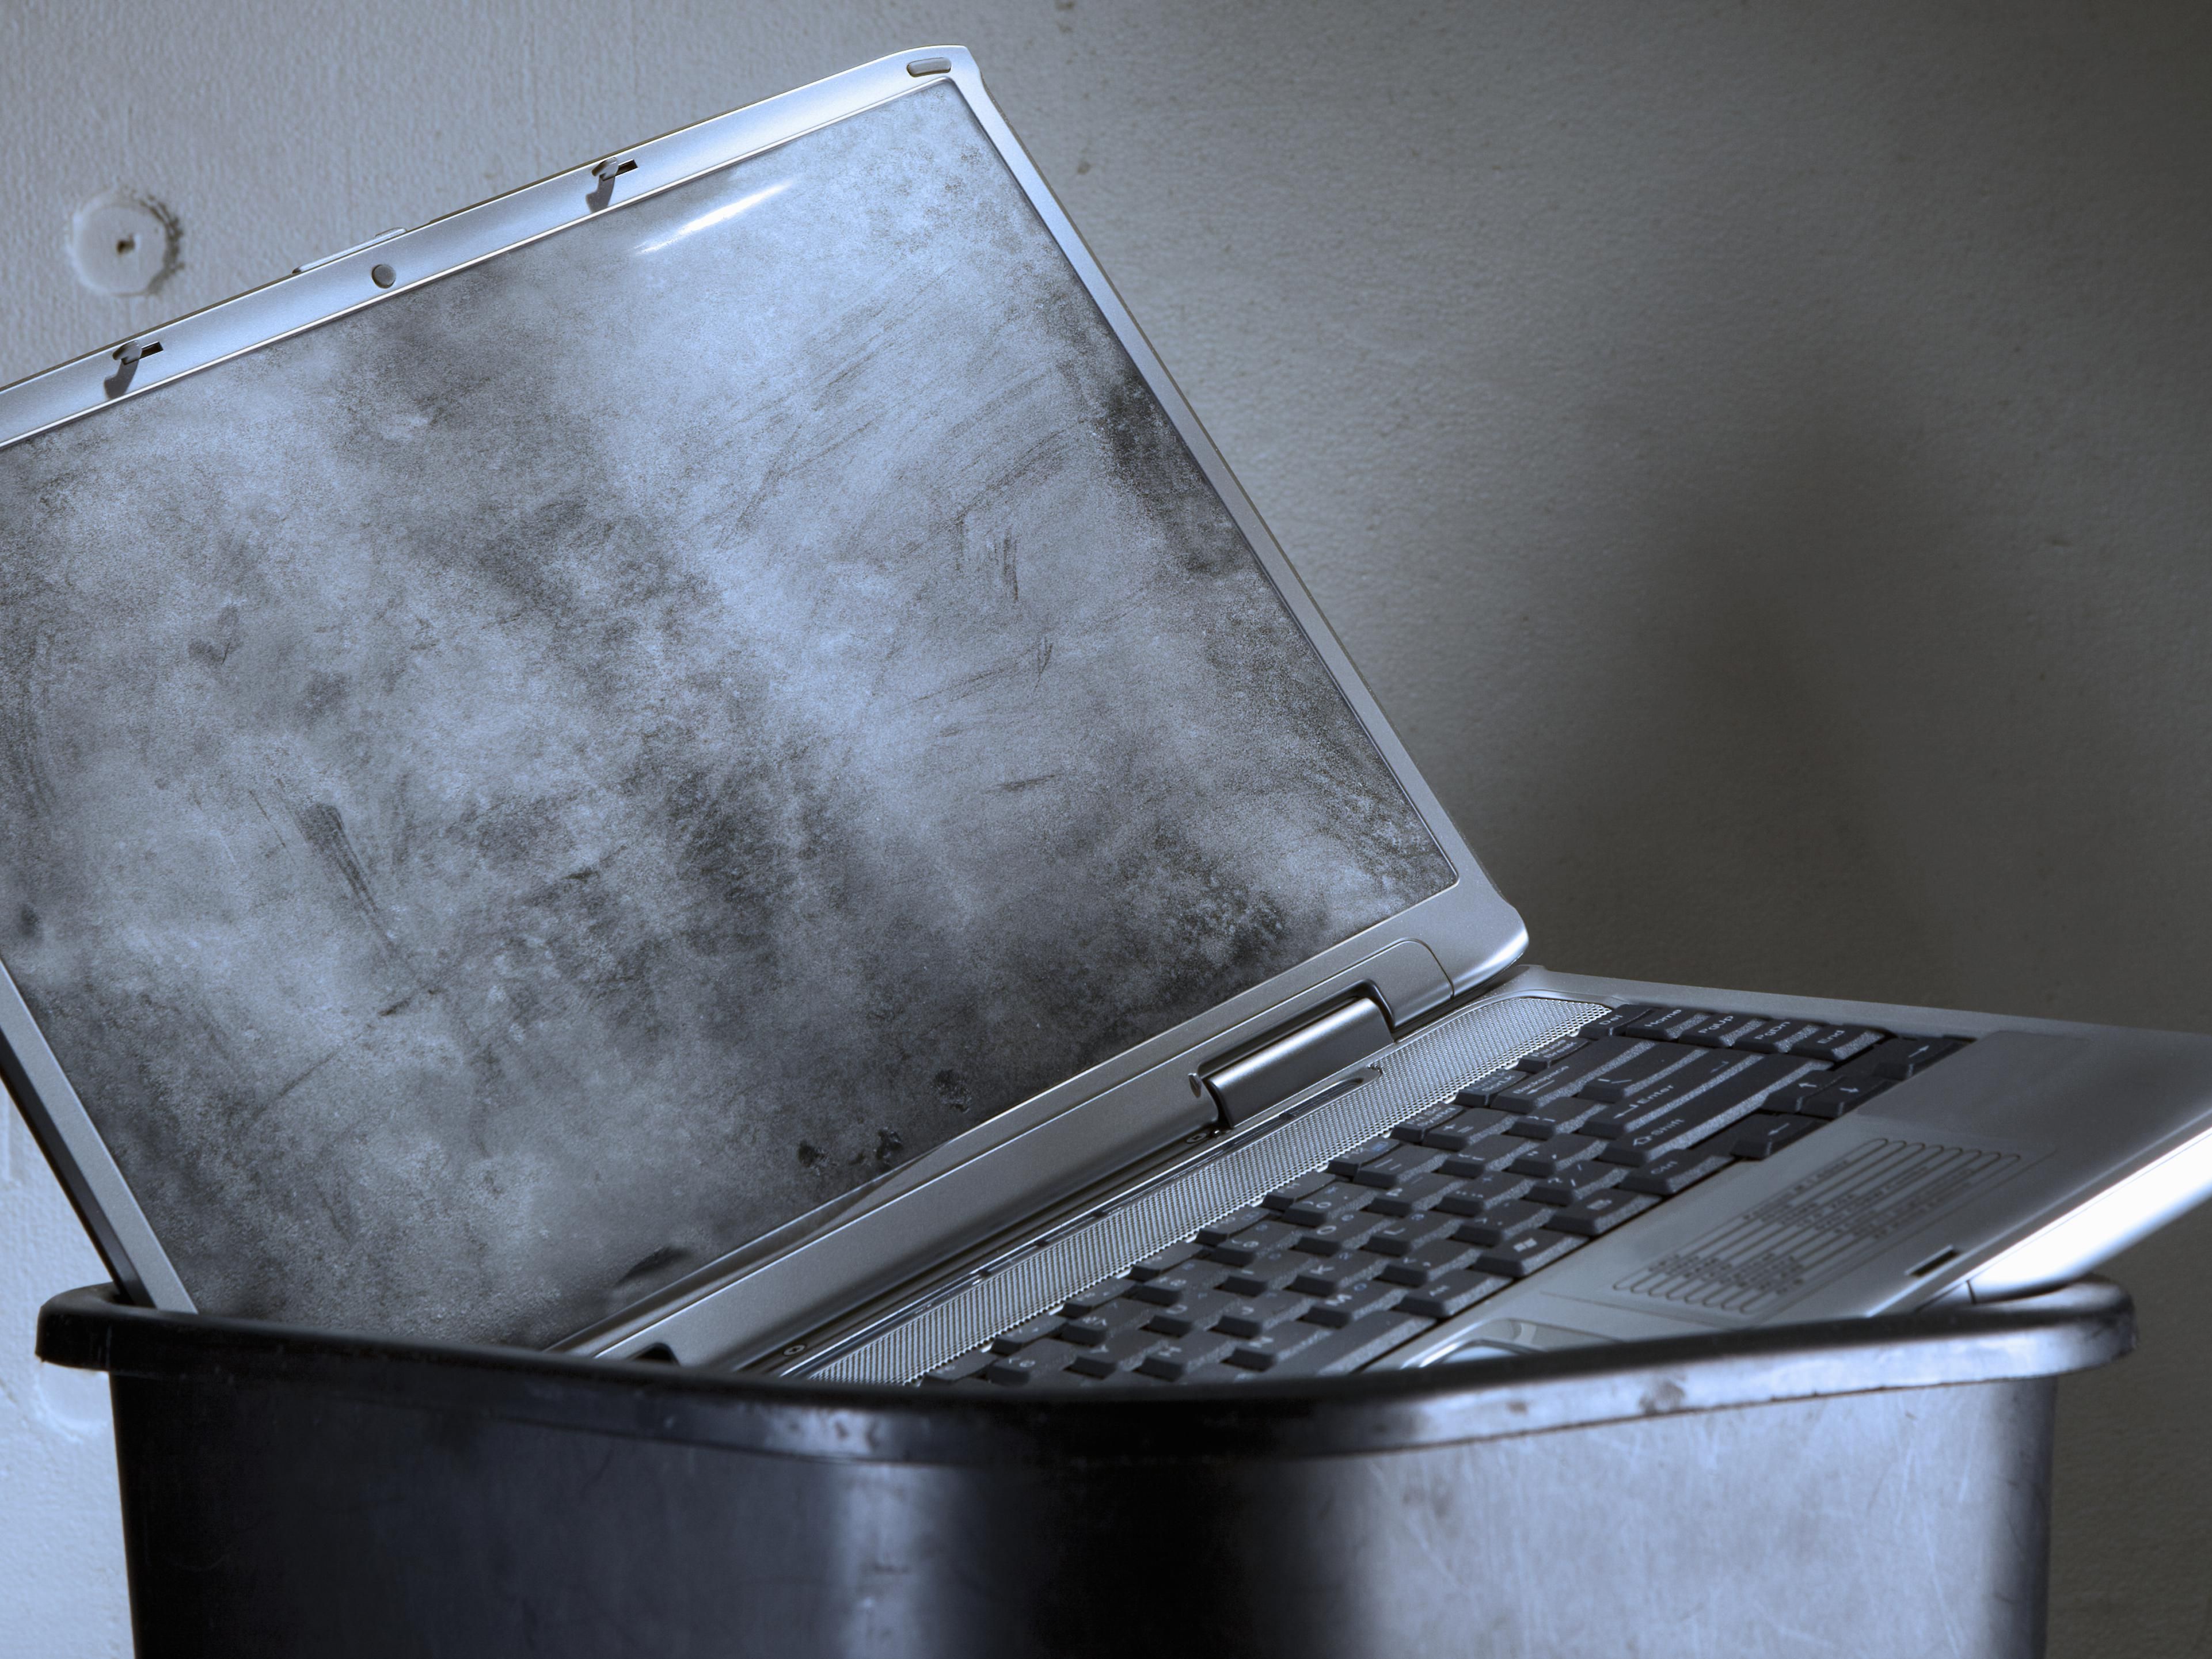 A laptop computer sits in a garbage pail.